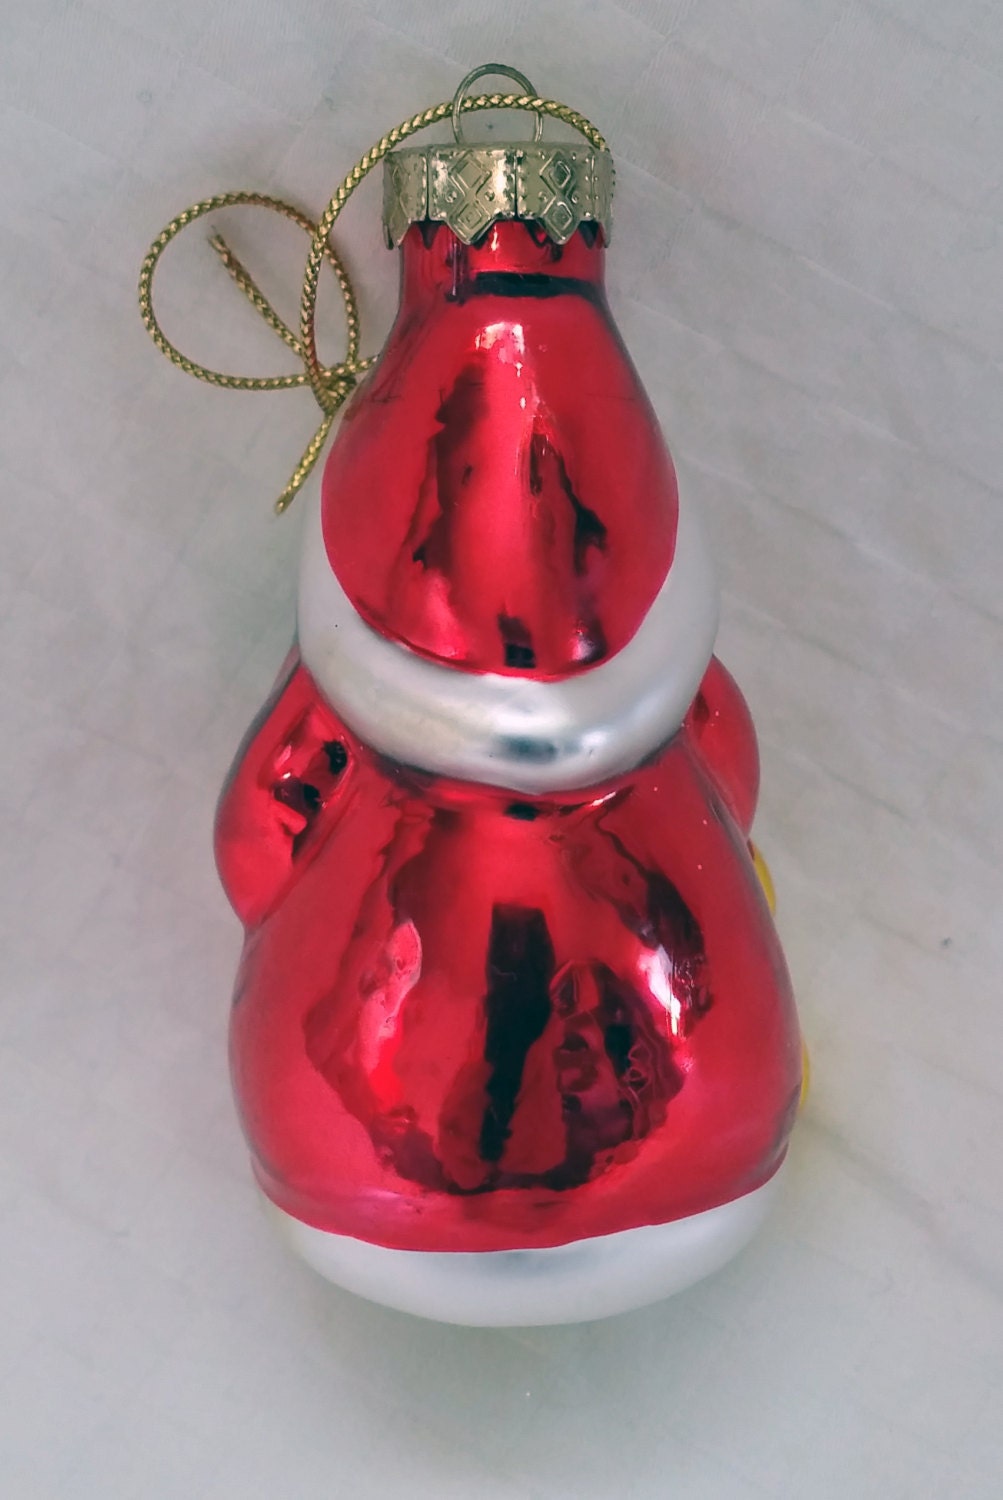 Glass Santa and Snowman Ornaments by TheBlueRoseStudio on Etsy